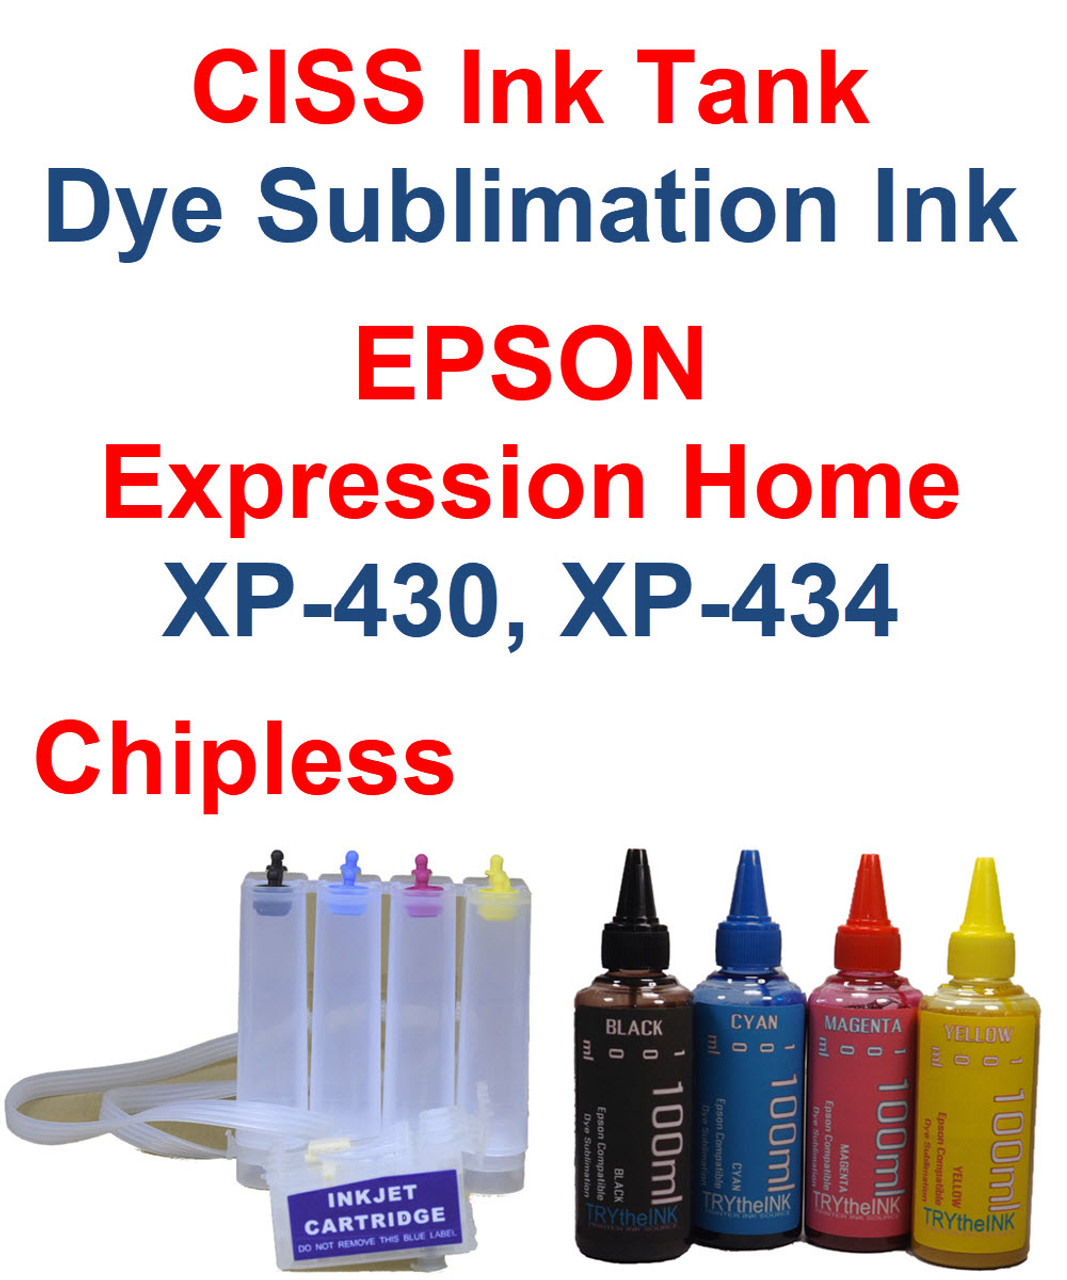 CISS Chipless Ink Tank 4 100ml Dye Sublimation Ink for Epson Expression Home XP-430 XP-434 Printers